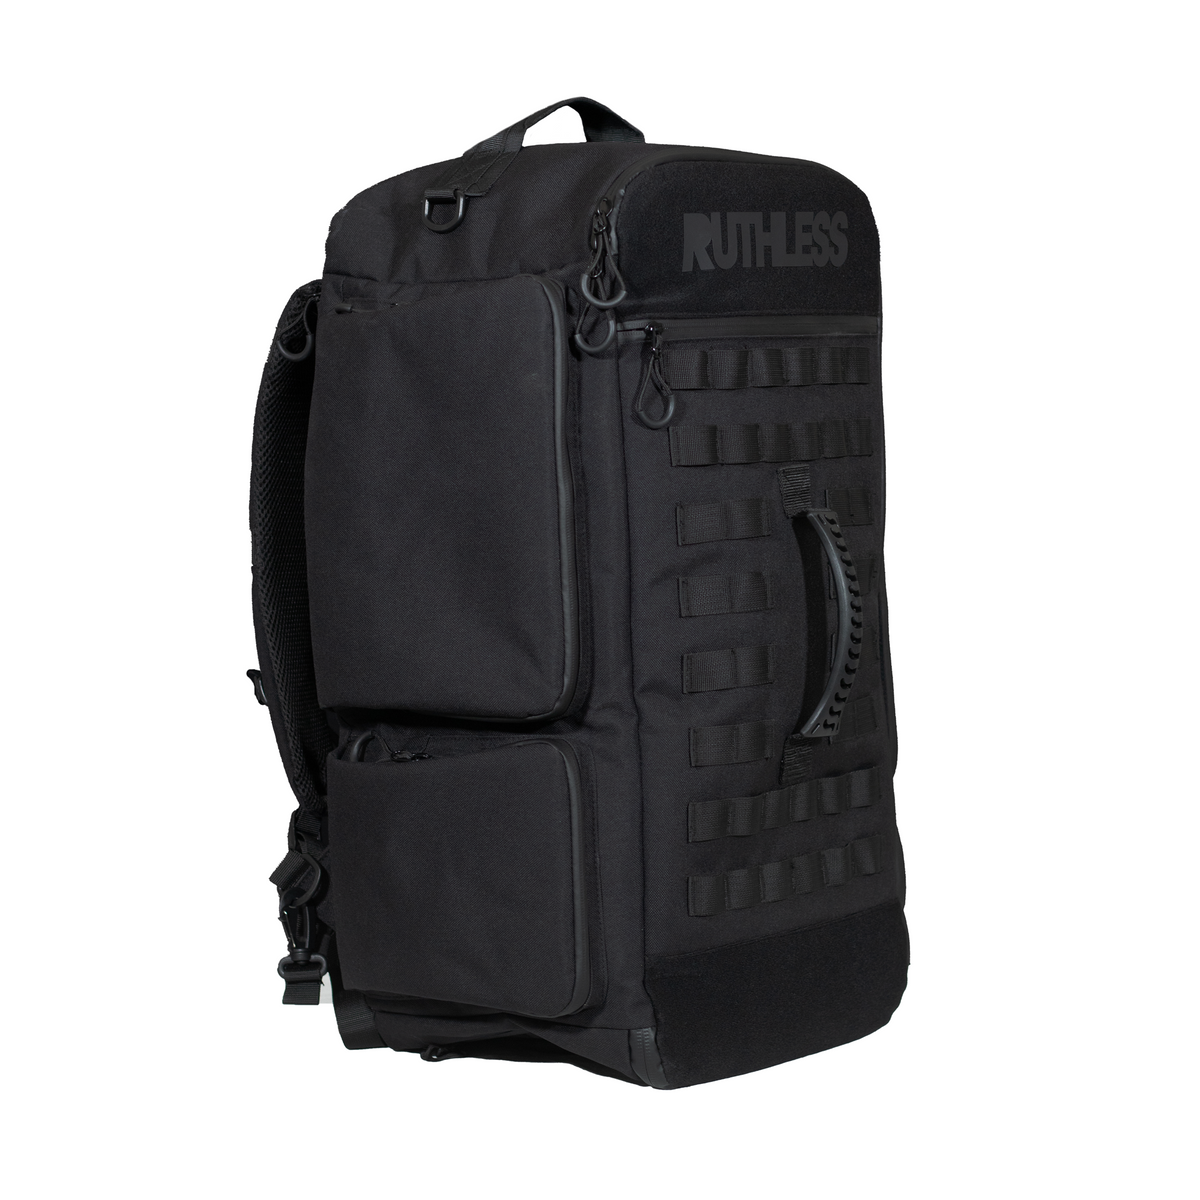 Pro Duffle Backpack - Stealth **CLOSEOUT SALE**